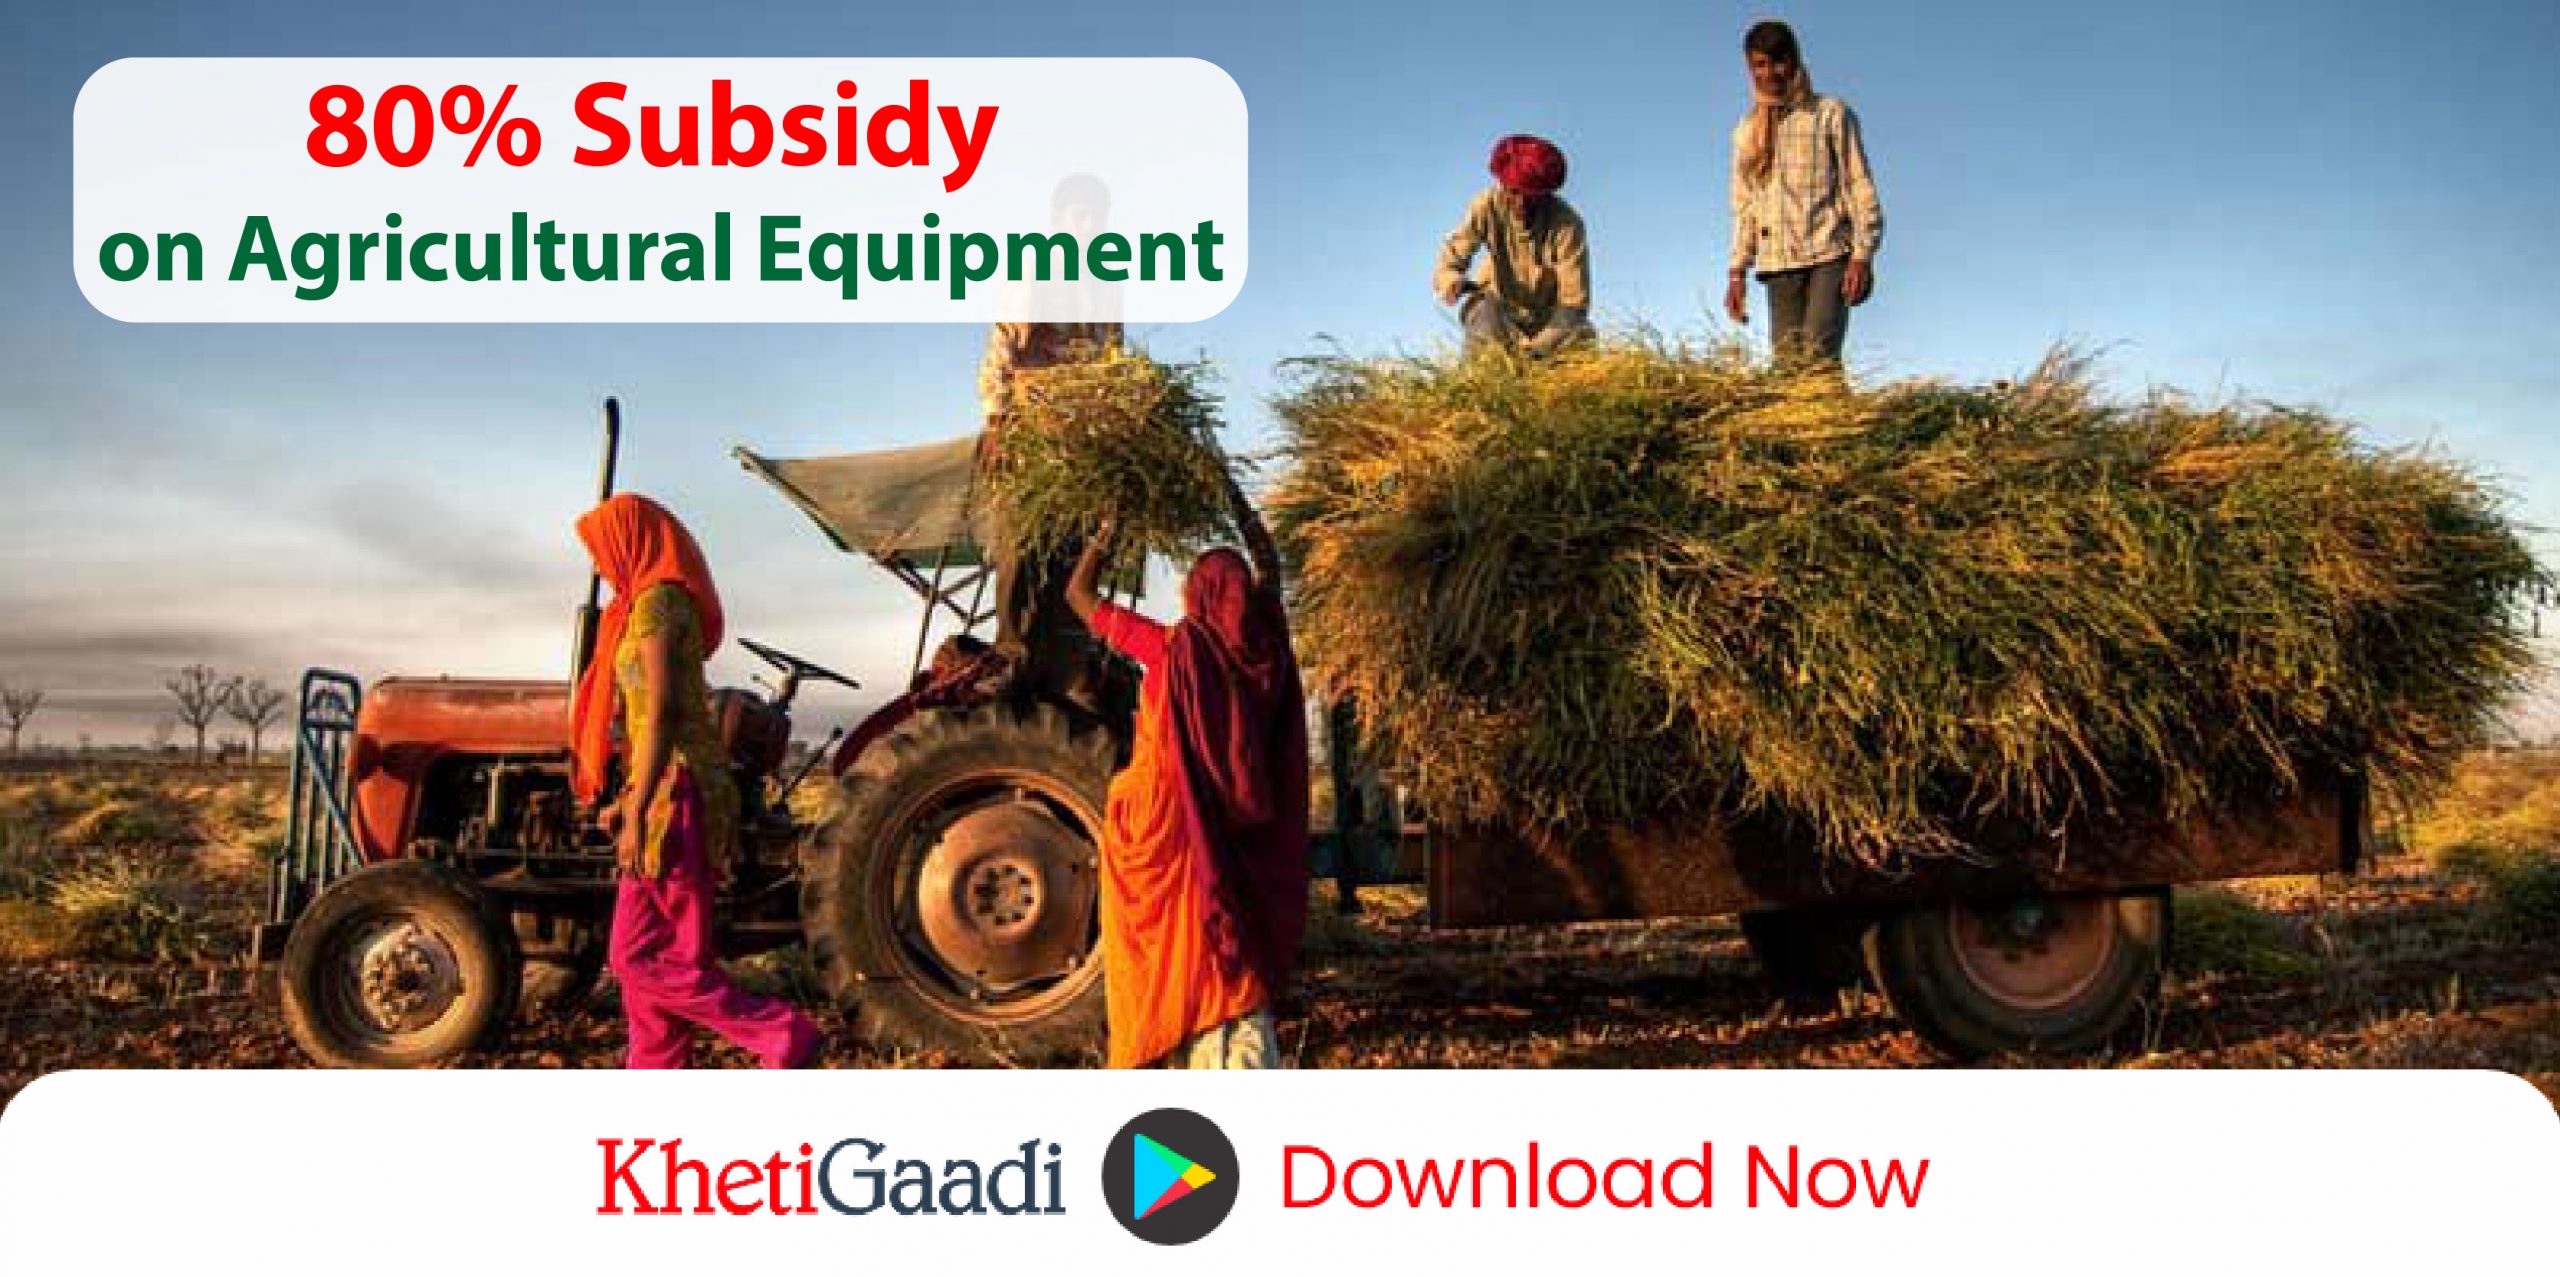 Positive Update for Farmers: Jharkhand Farmers Empowered with 80% Subsidy on Agricultural Equipment